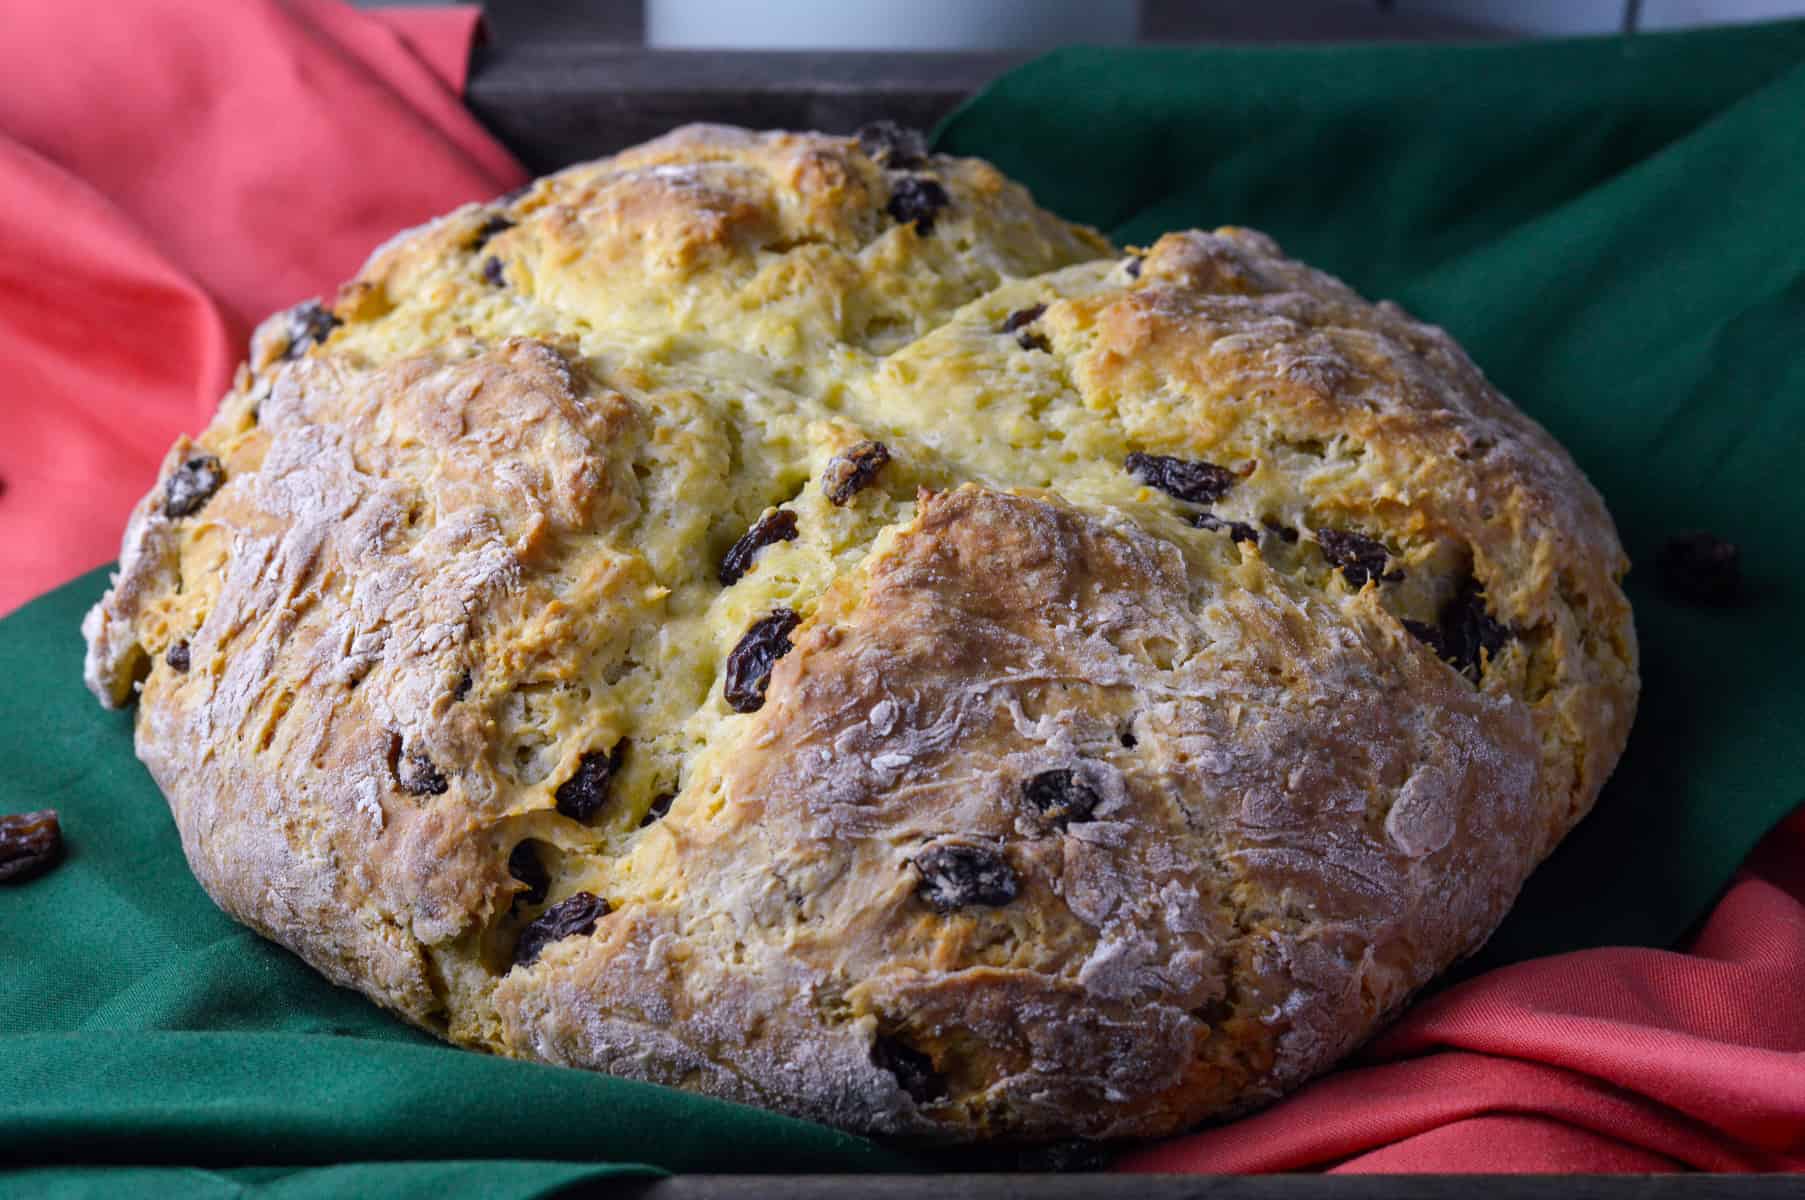 Uncut Loaf of soda bread with raisins on green and orange napkins on a serving tray with raisins scattered